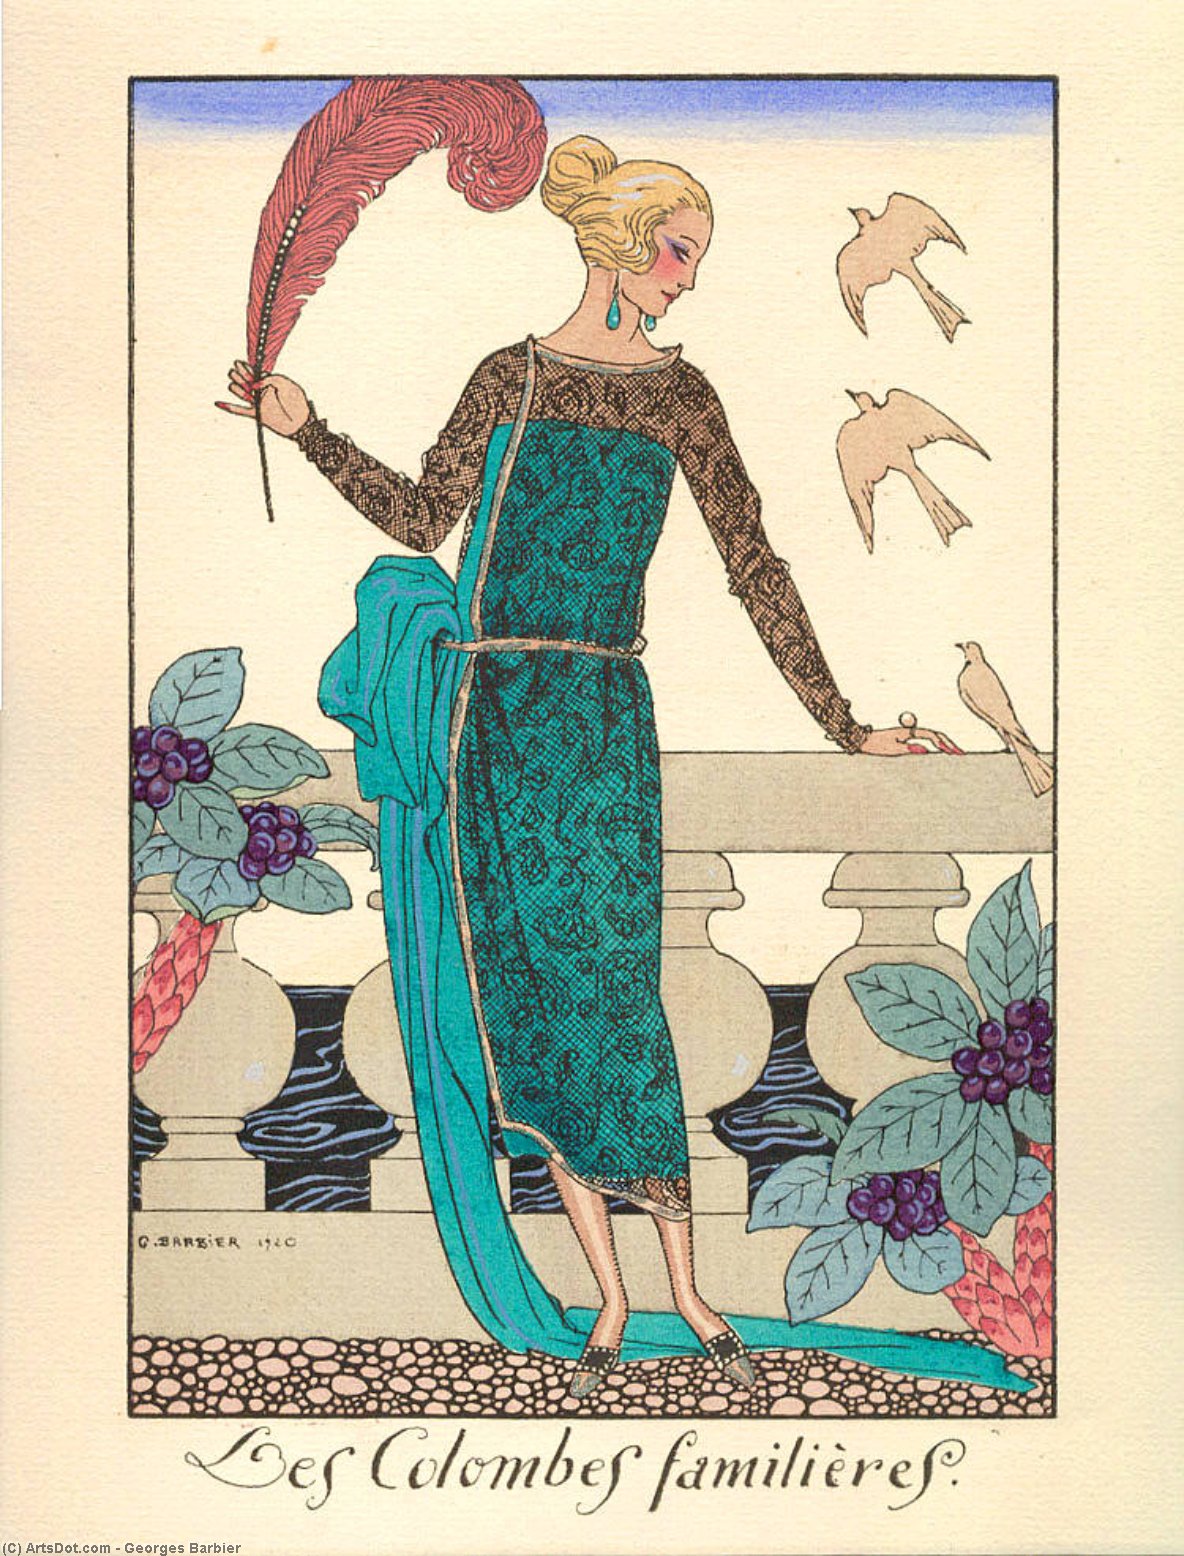 WikiOO.org – 美術百科全書 - 繪畫，作品 Georges Barbier - 莱斯 columbes familieres